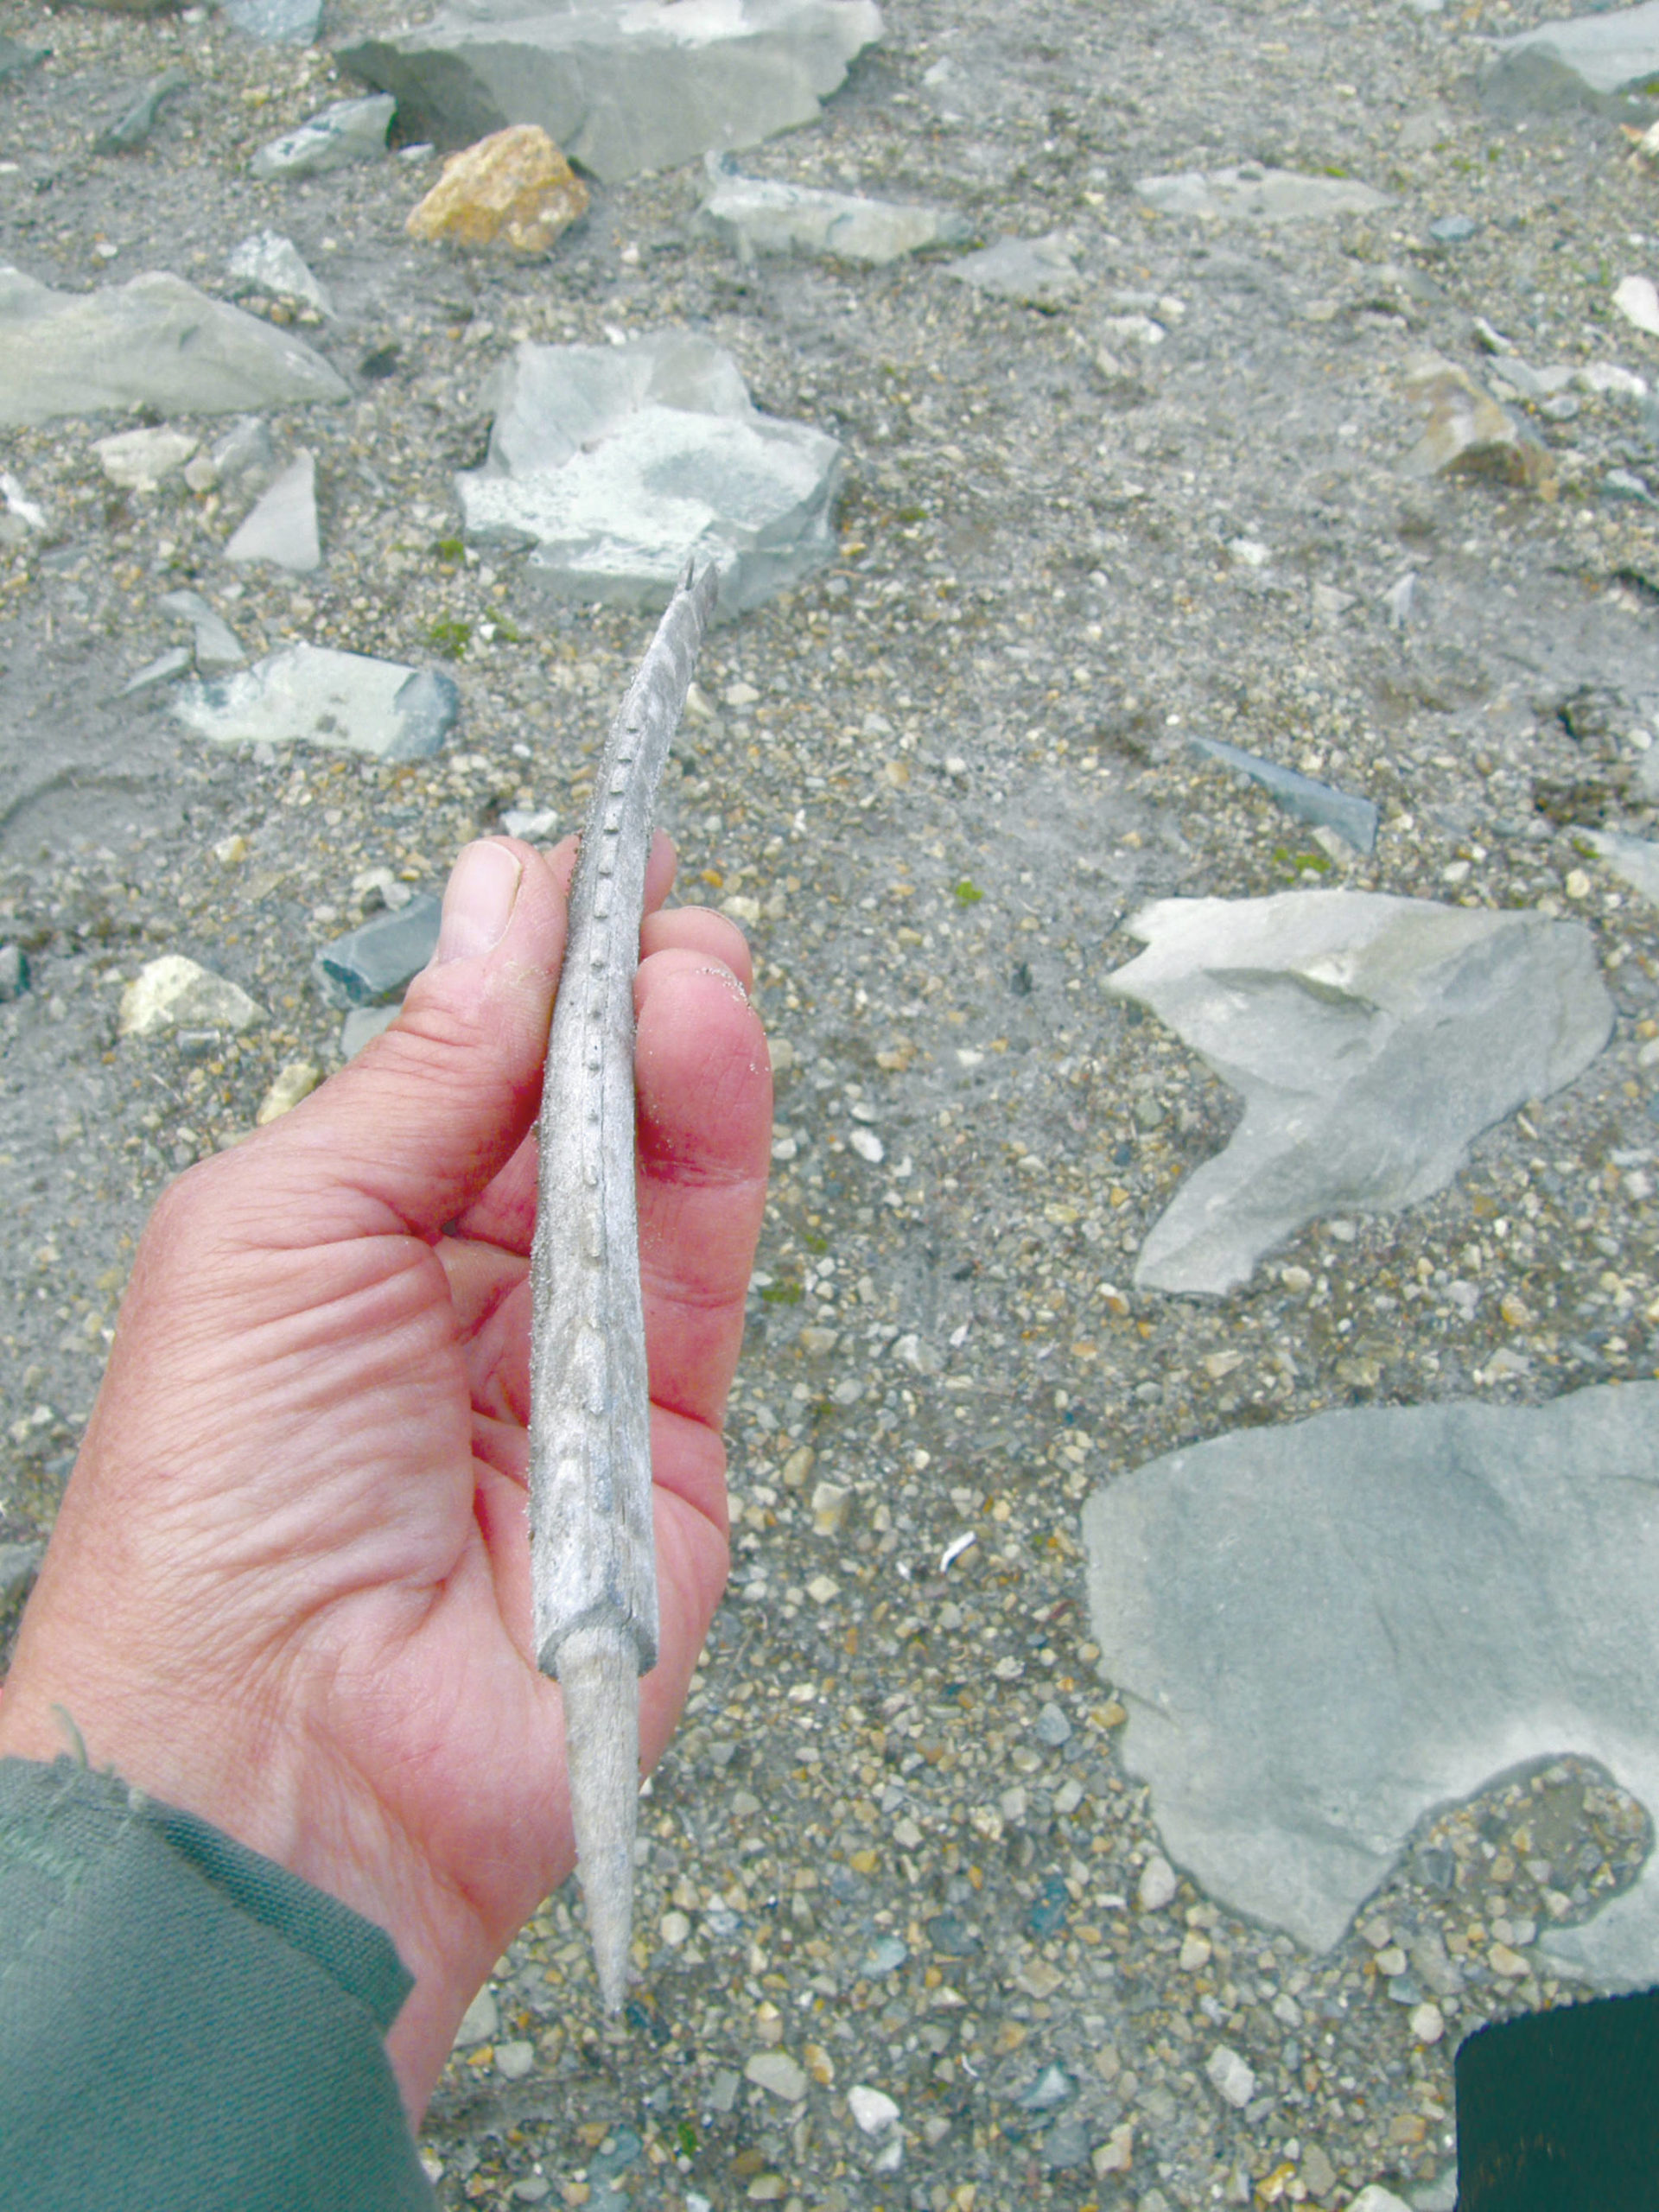 An antler projectile point recovered from an ice patch in Lake Clark National Park and Preserve. (Photo provided by National Park Service)